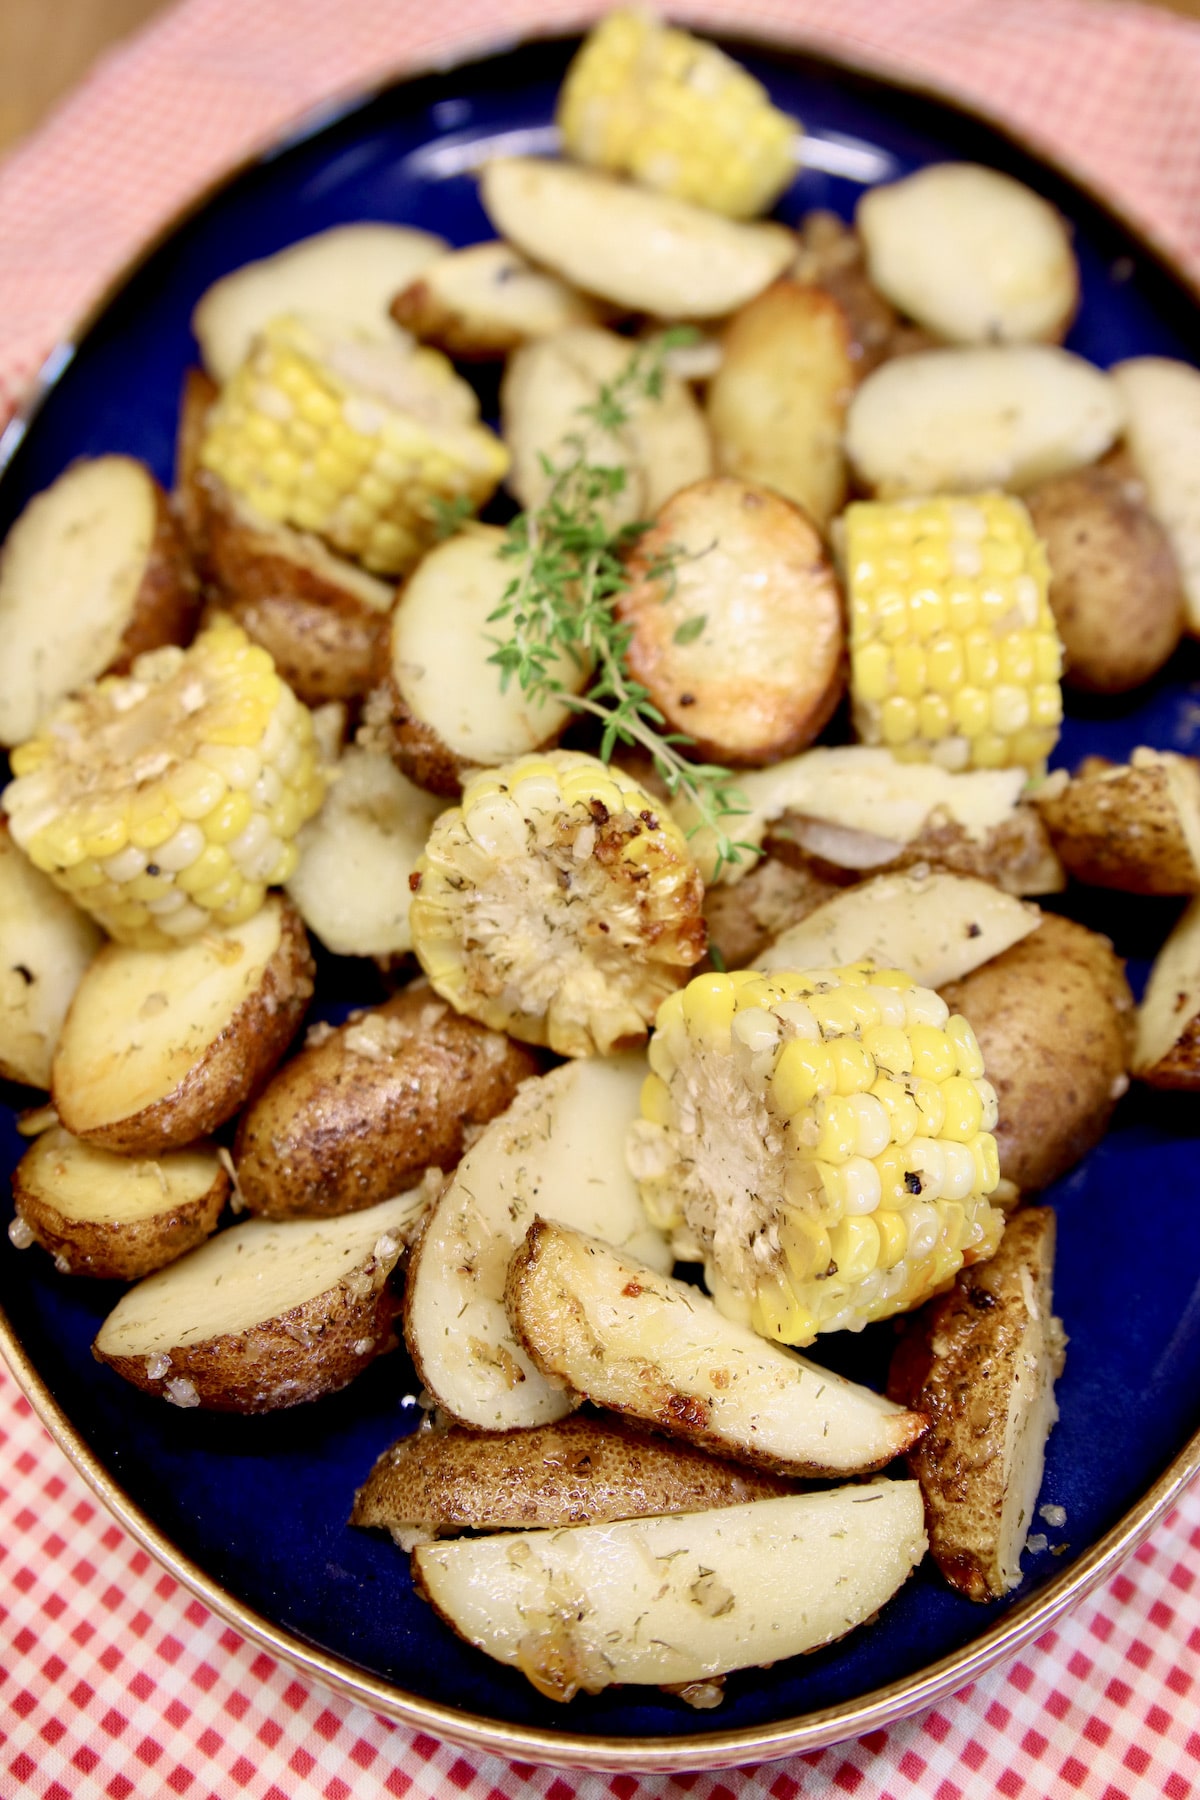 Platter with potatoes and corn cob slices.